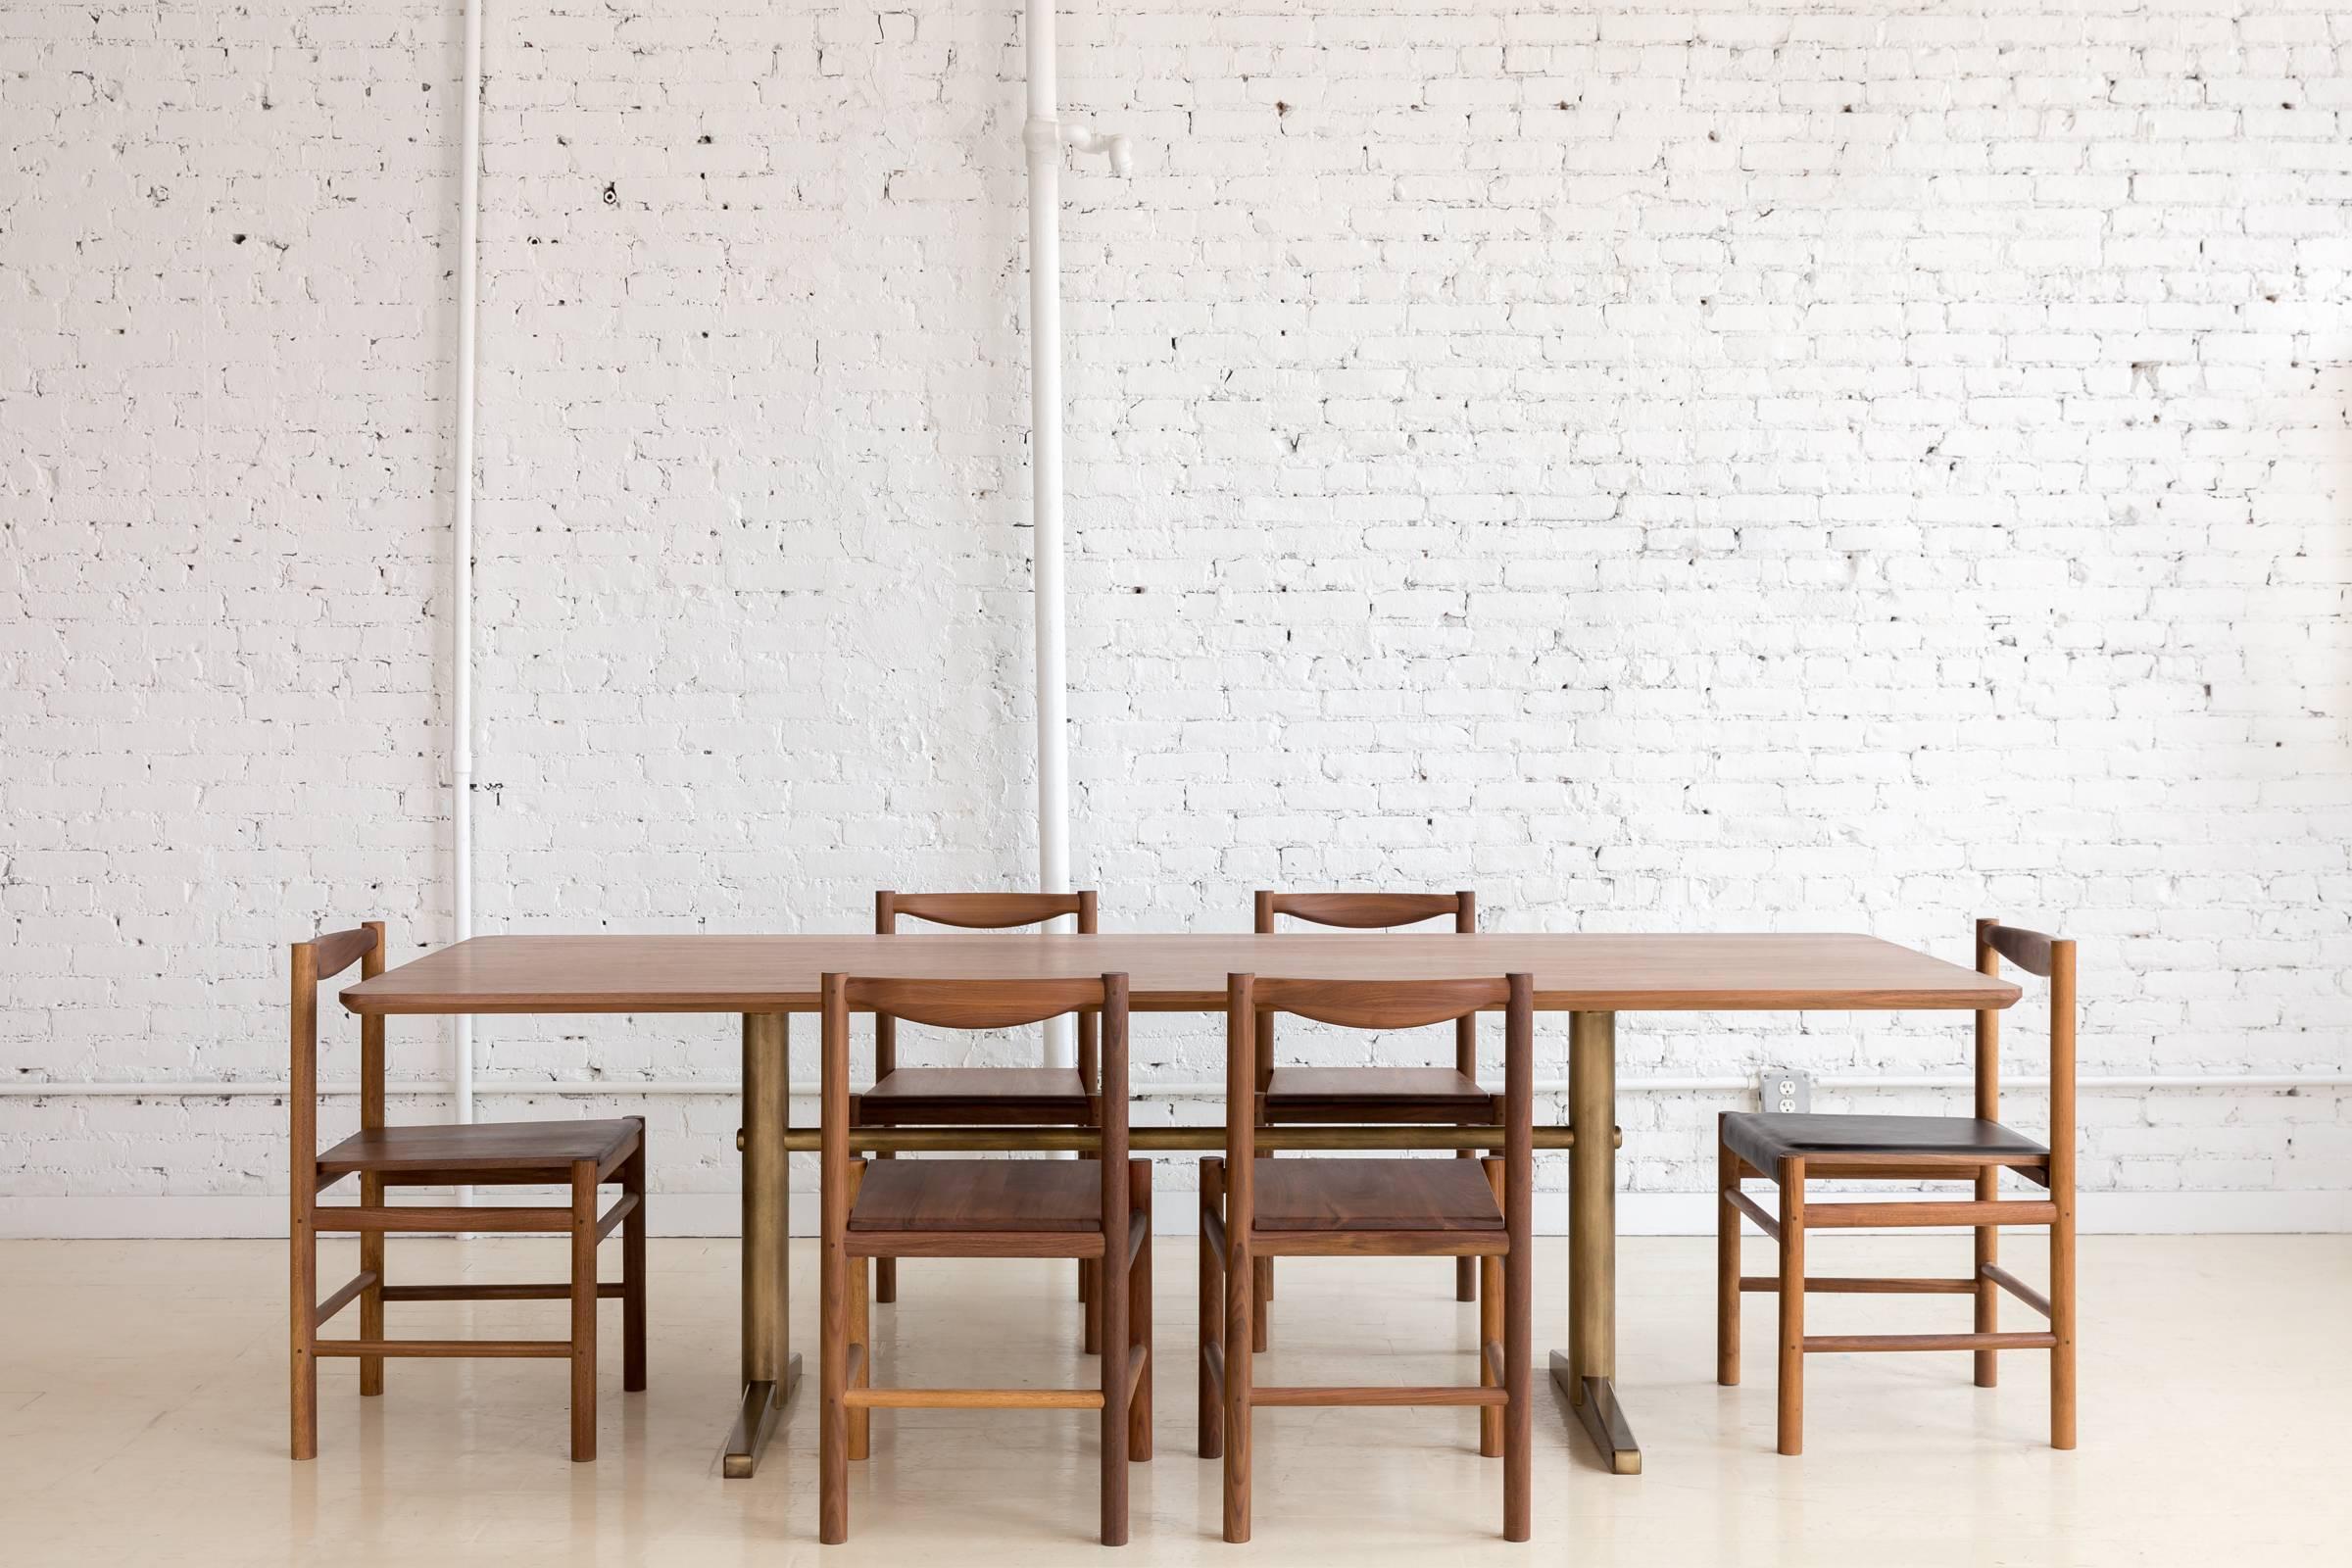 This contemporary dining table features a hardwood walnut top with rounded corners and a continuous bottom bevel that compliments details found on the brass pedestal base. 

All base components are precision machined from steel and plated in brass